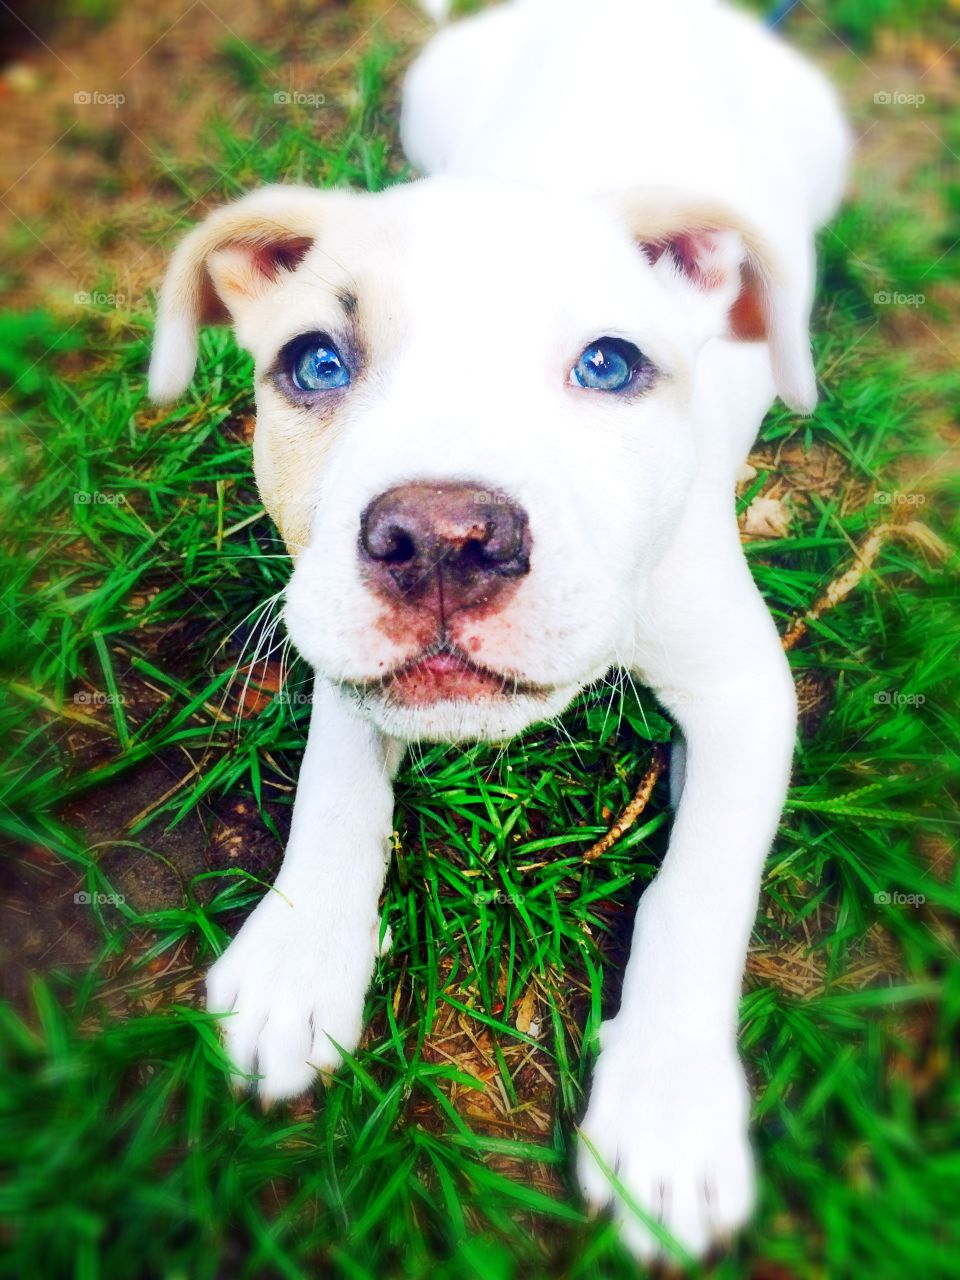 Blue eyed pit bull . My friends dog, she sure is cute!! Those blue eyes!! 